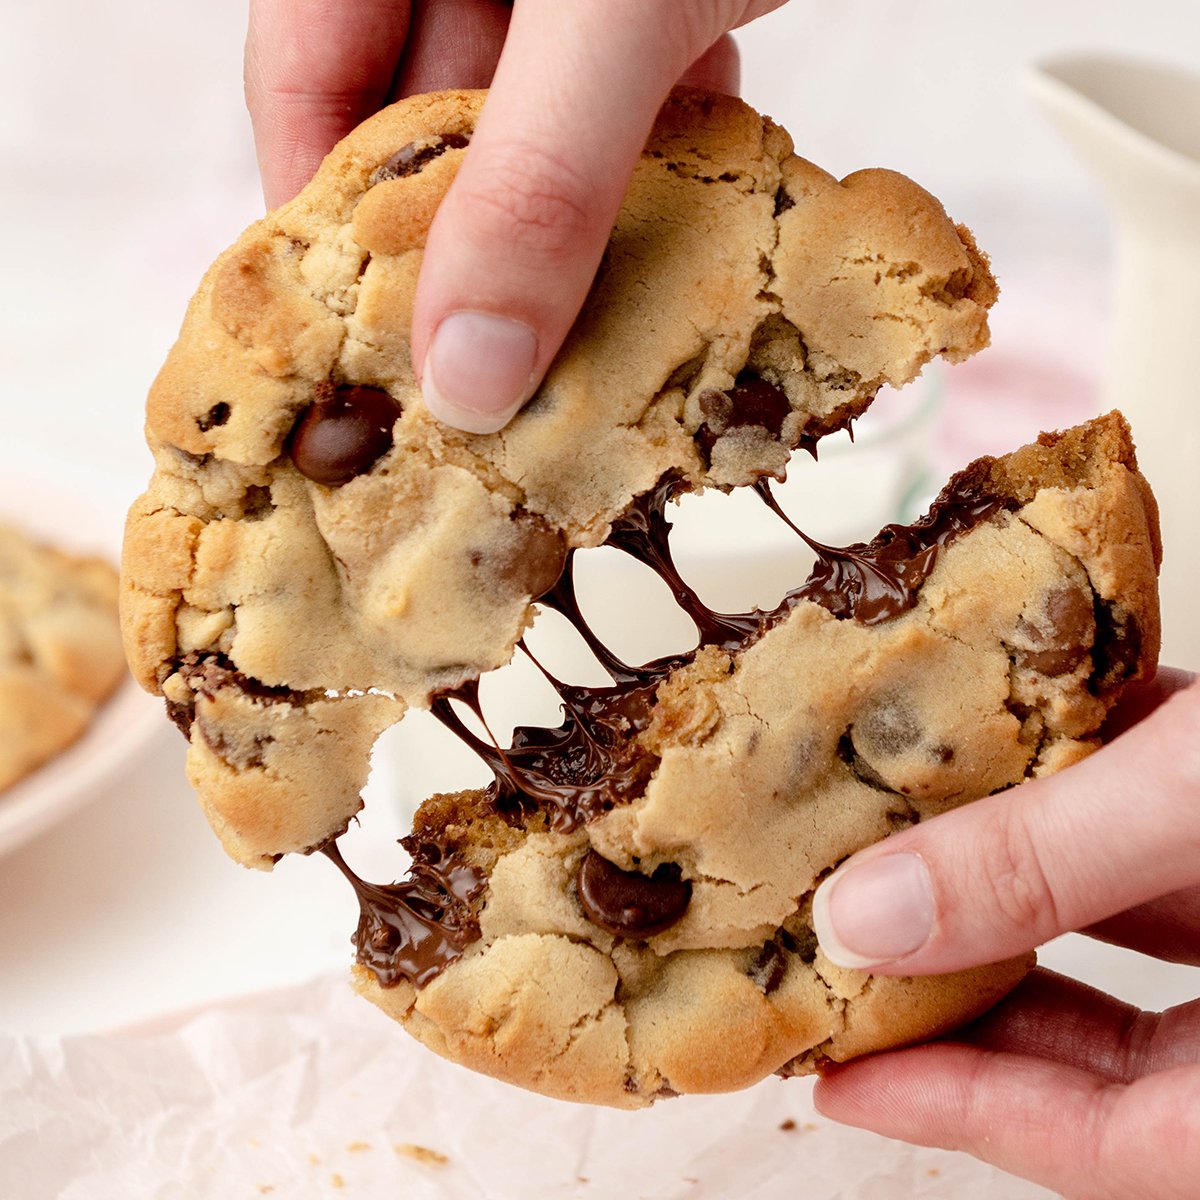 hand pulling cookie apart chocolate melting inside